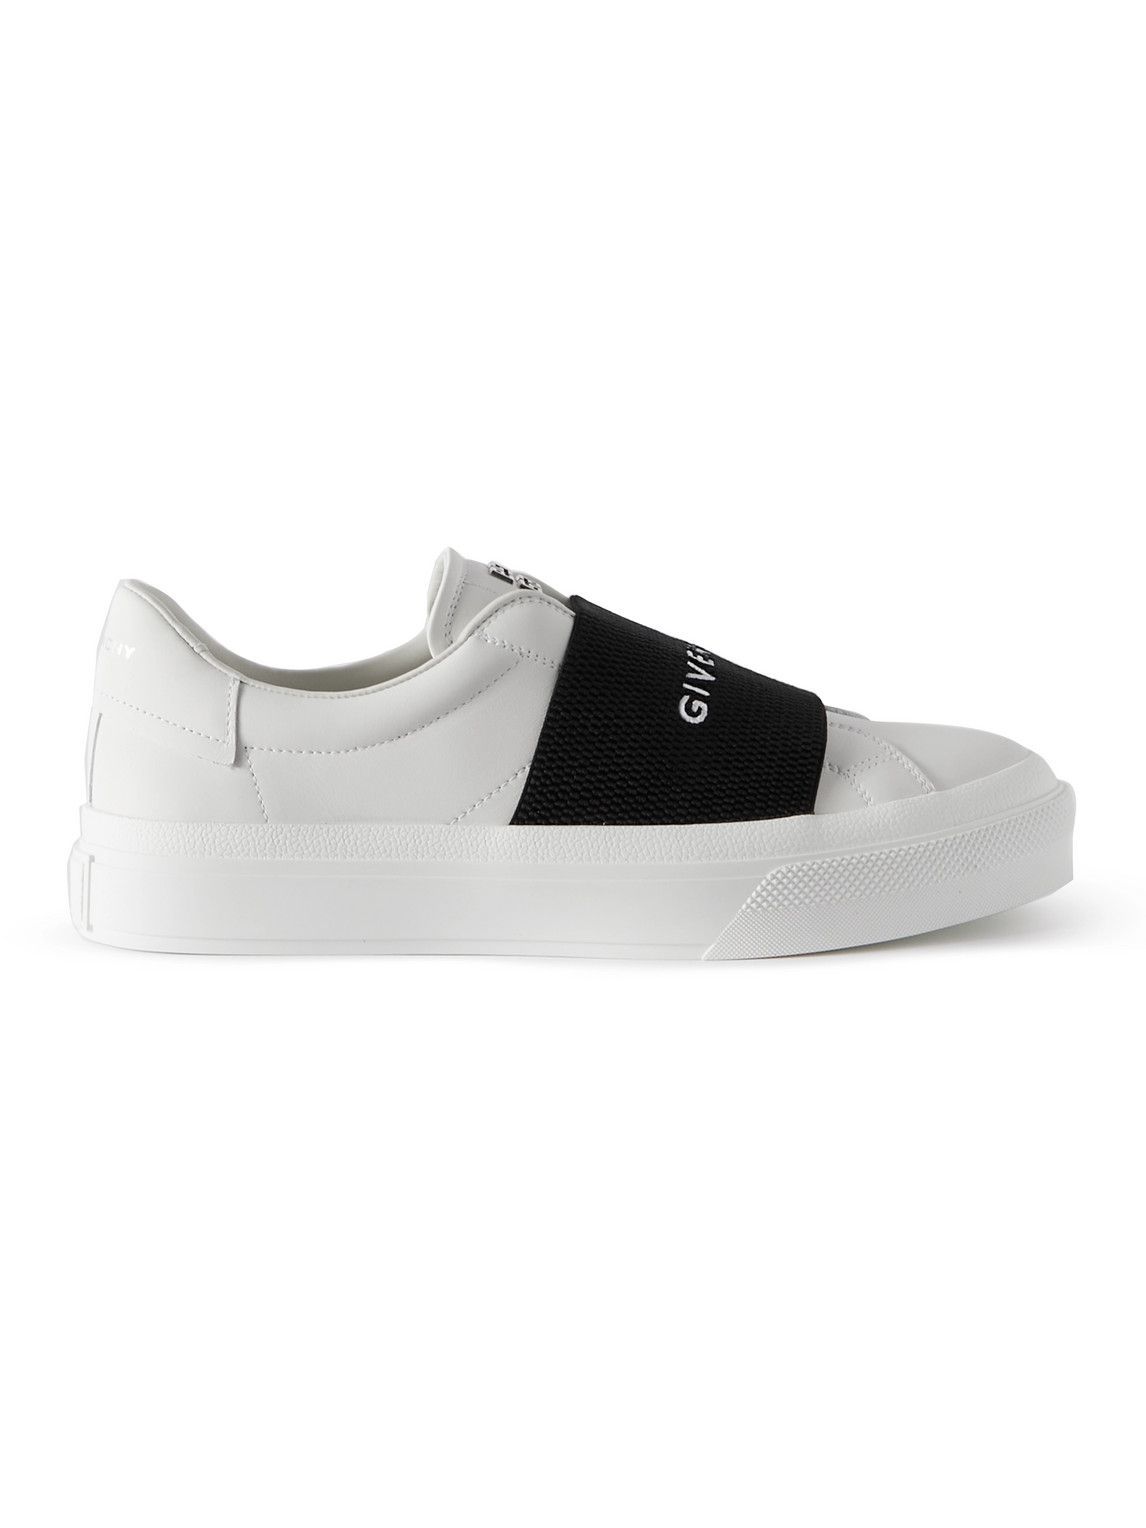 Givenchy - City Court Slip-On Leather Sneakers - White Givenchy